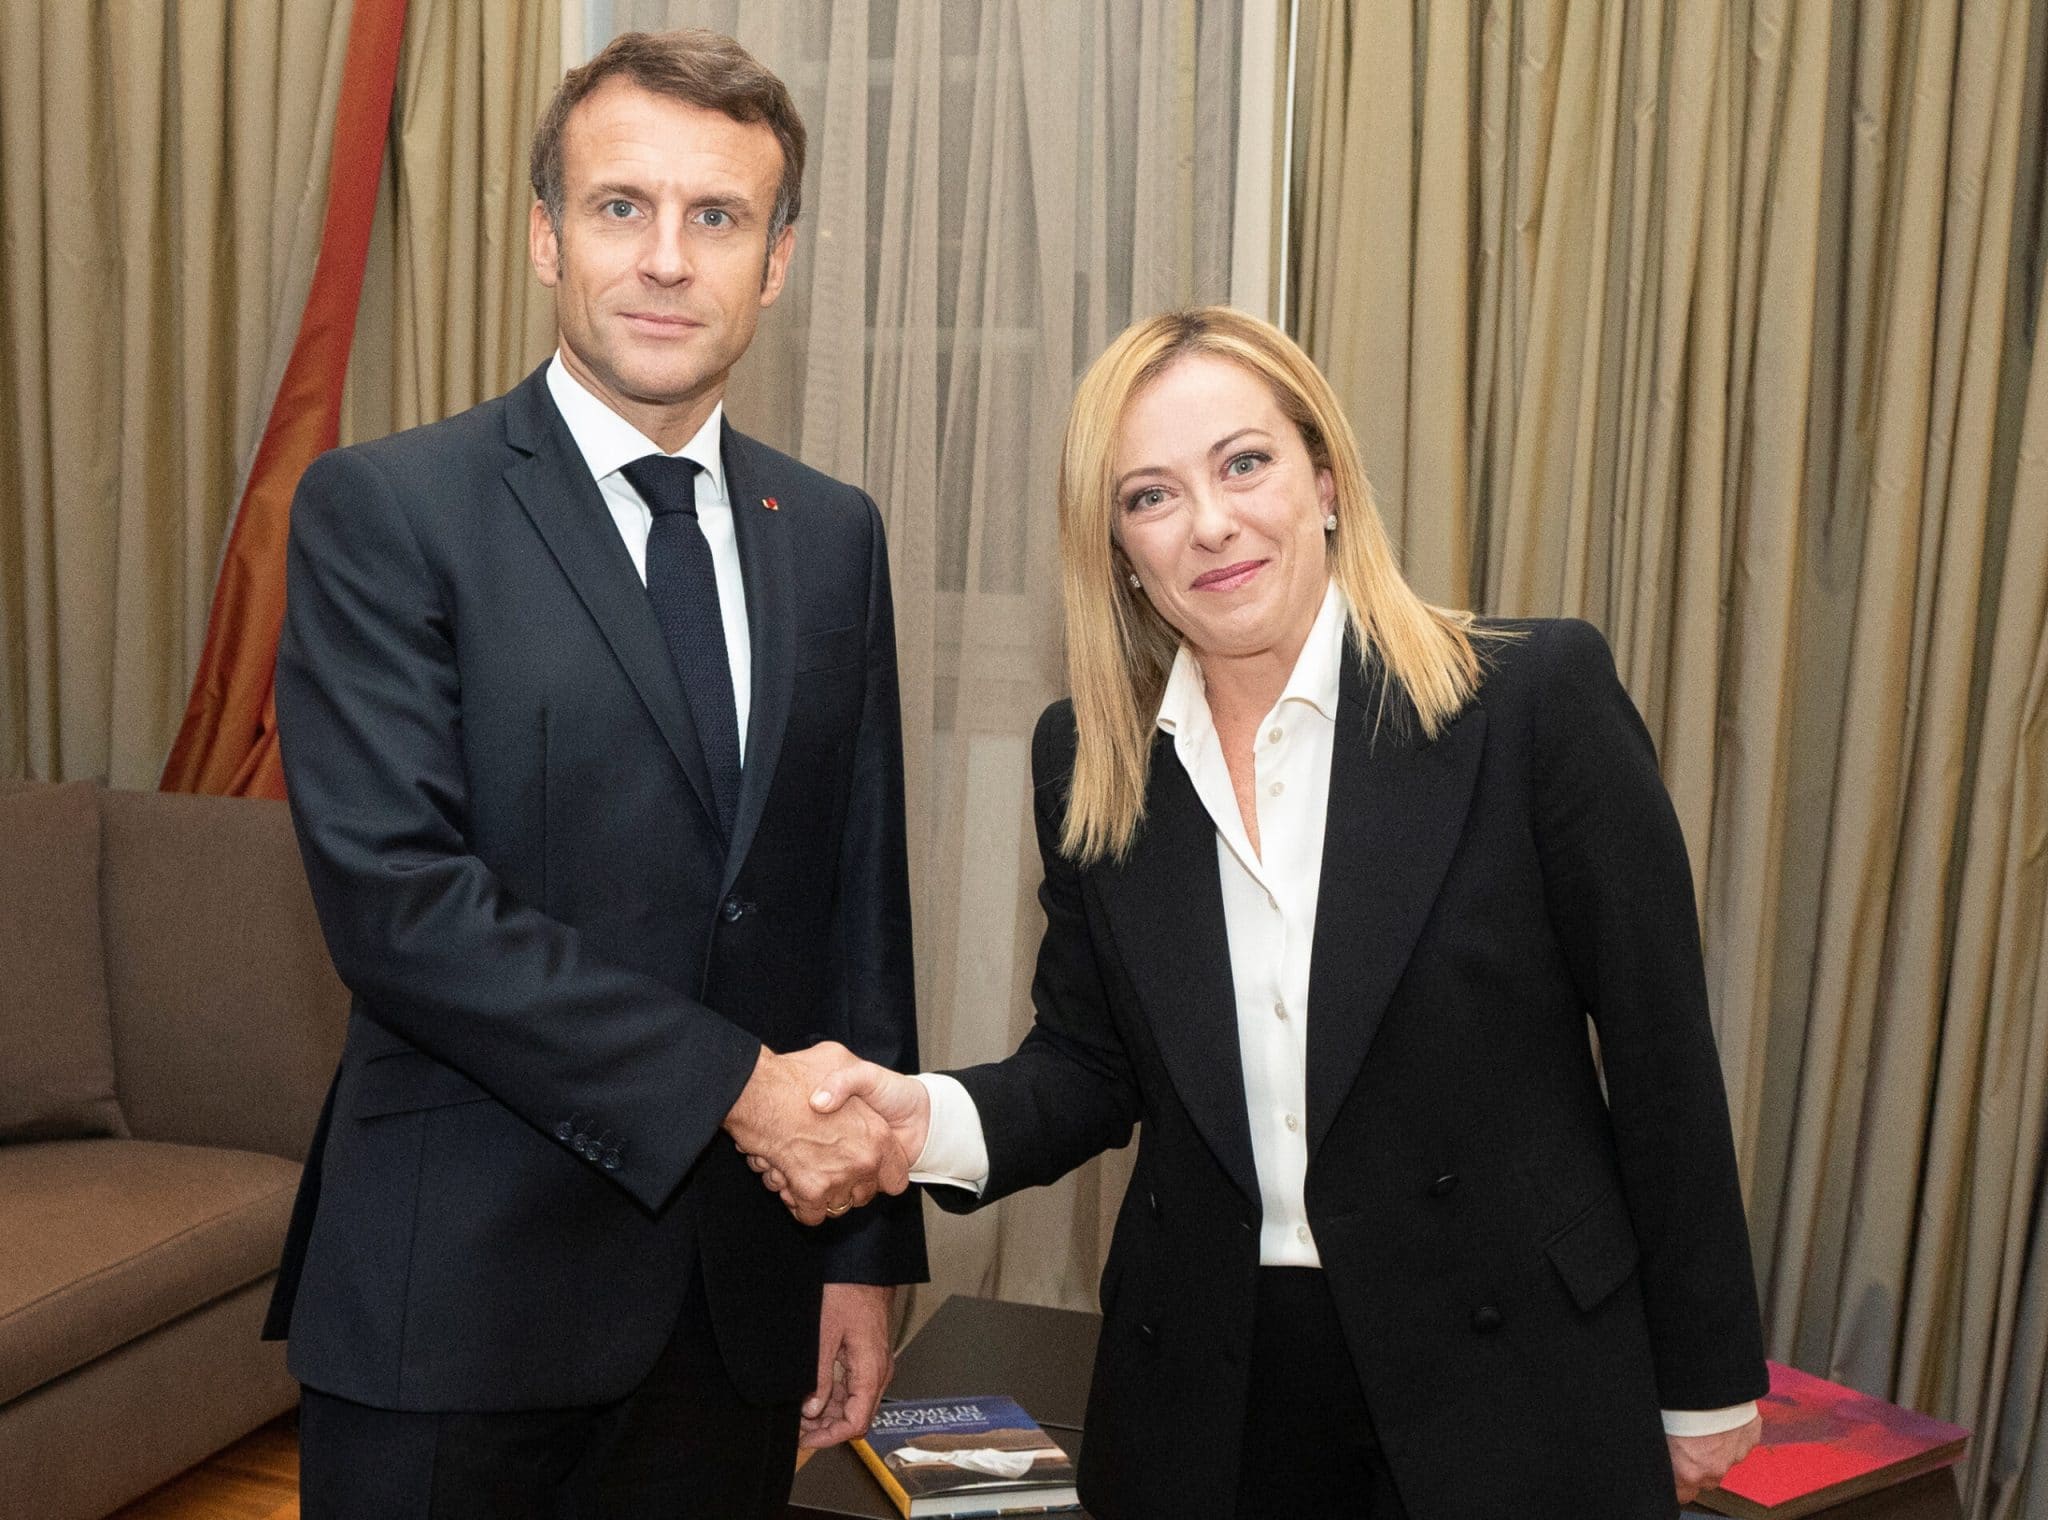 New Italy PM meets Macron on first day of office